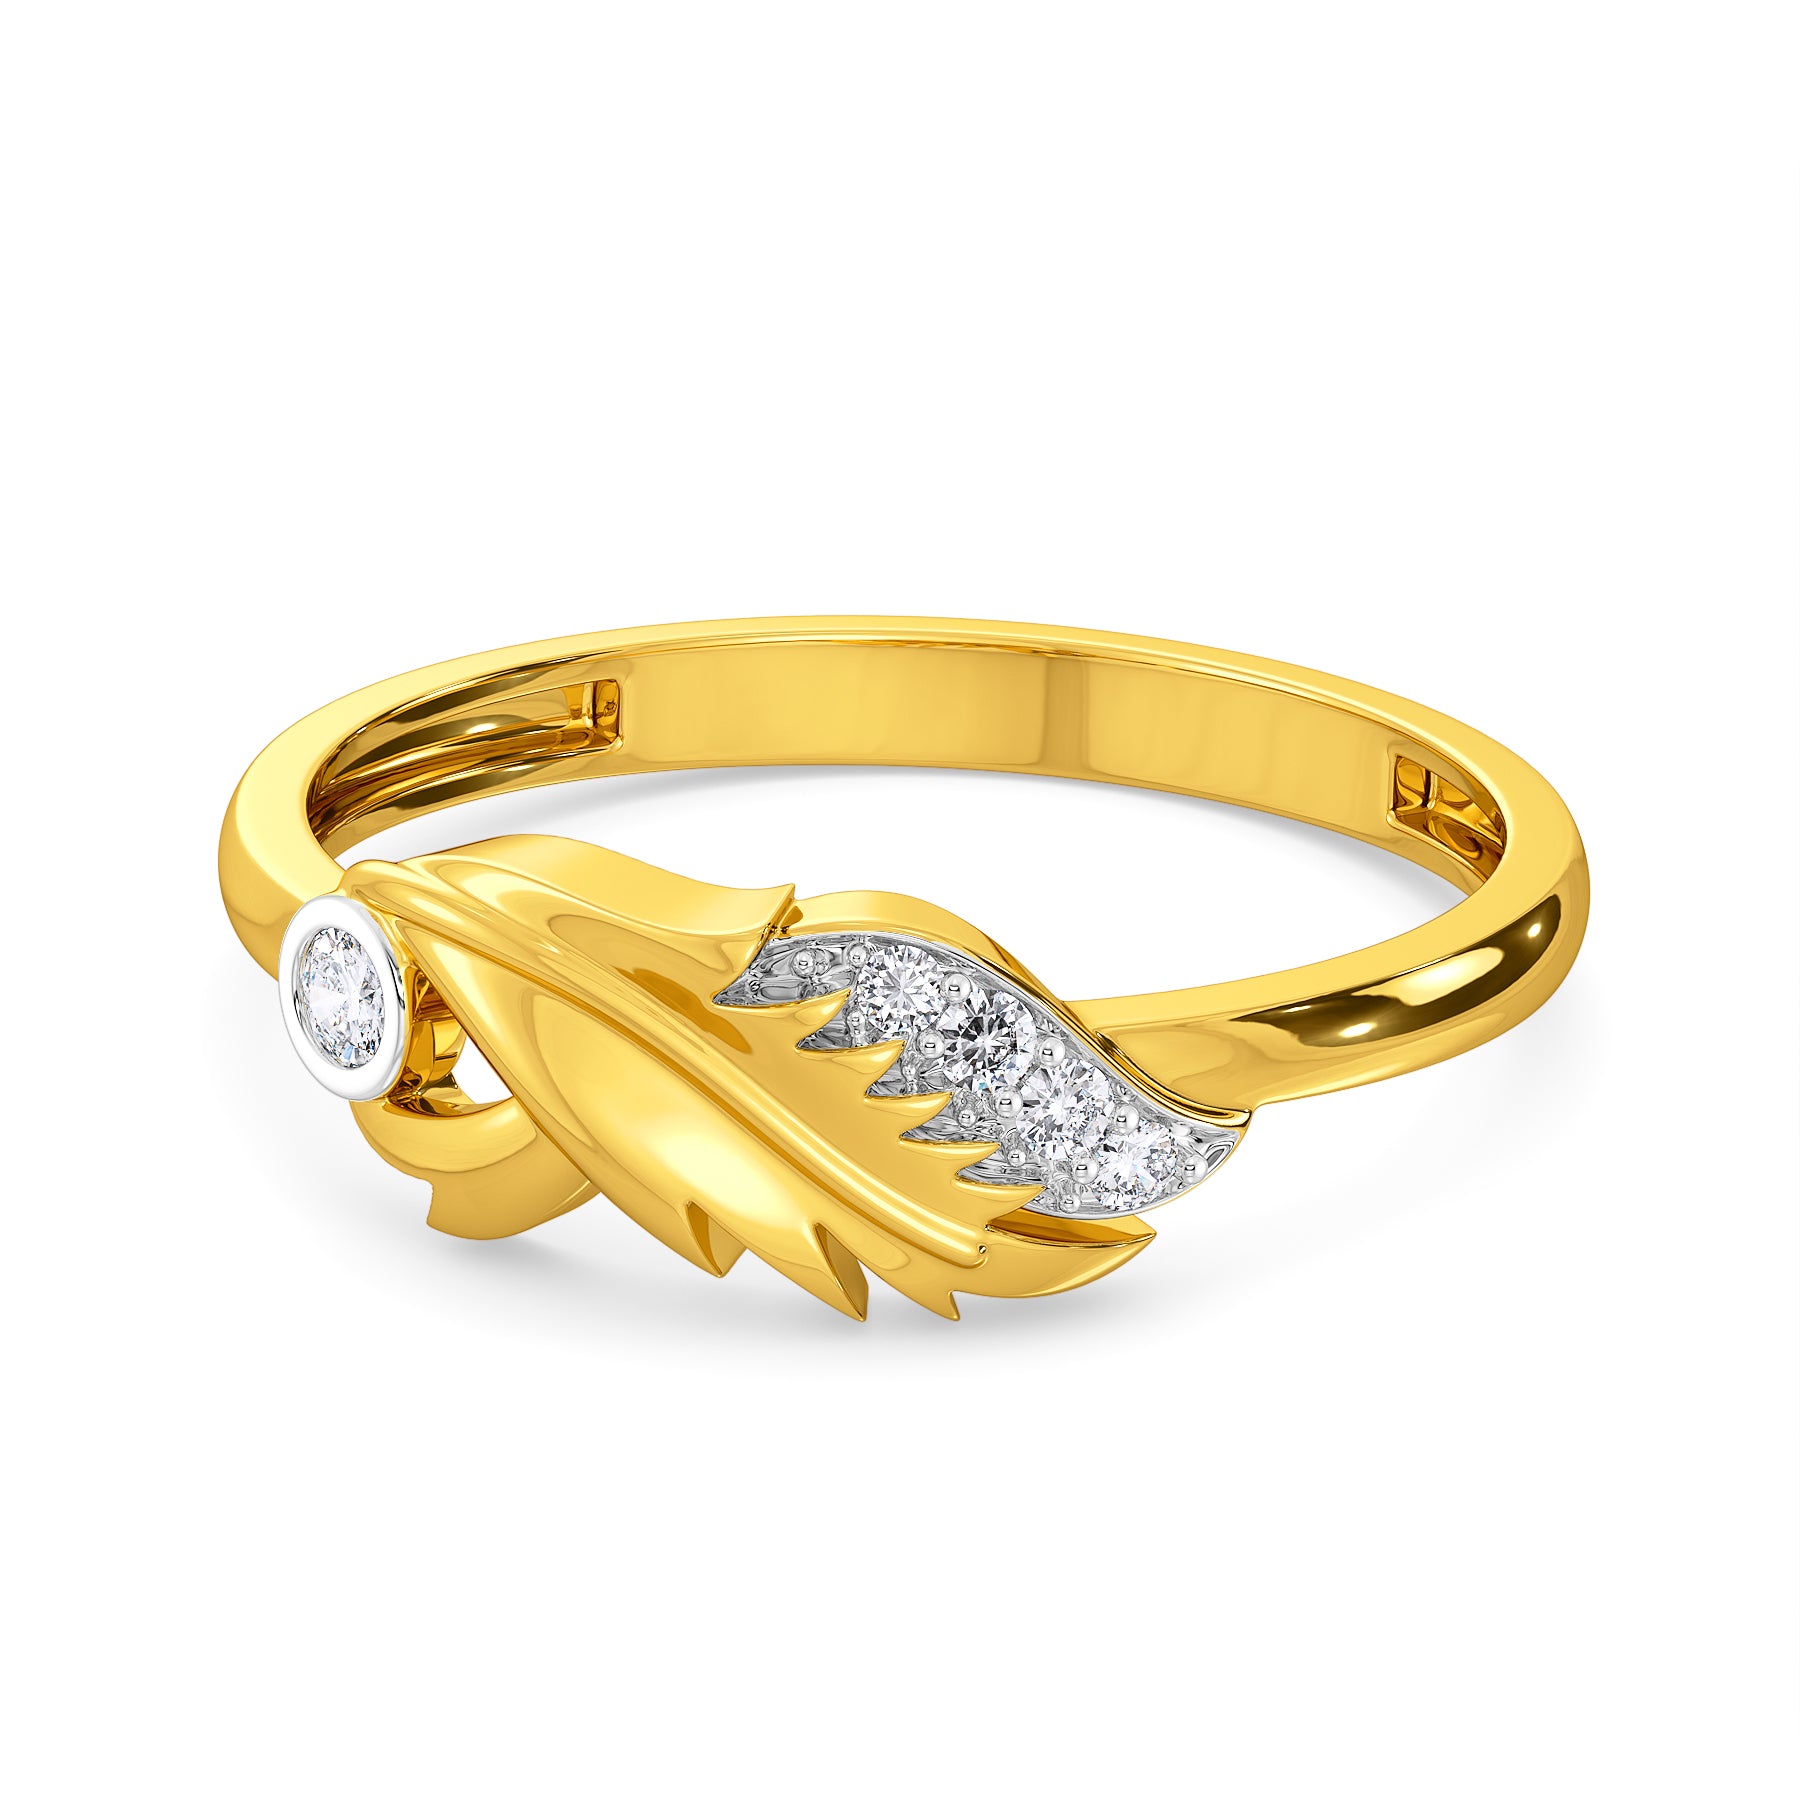 Buy Women Finger Ring Online In India At Discounted Prices